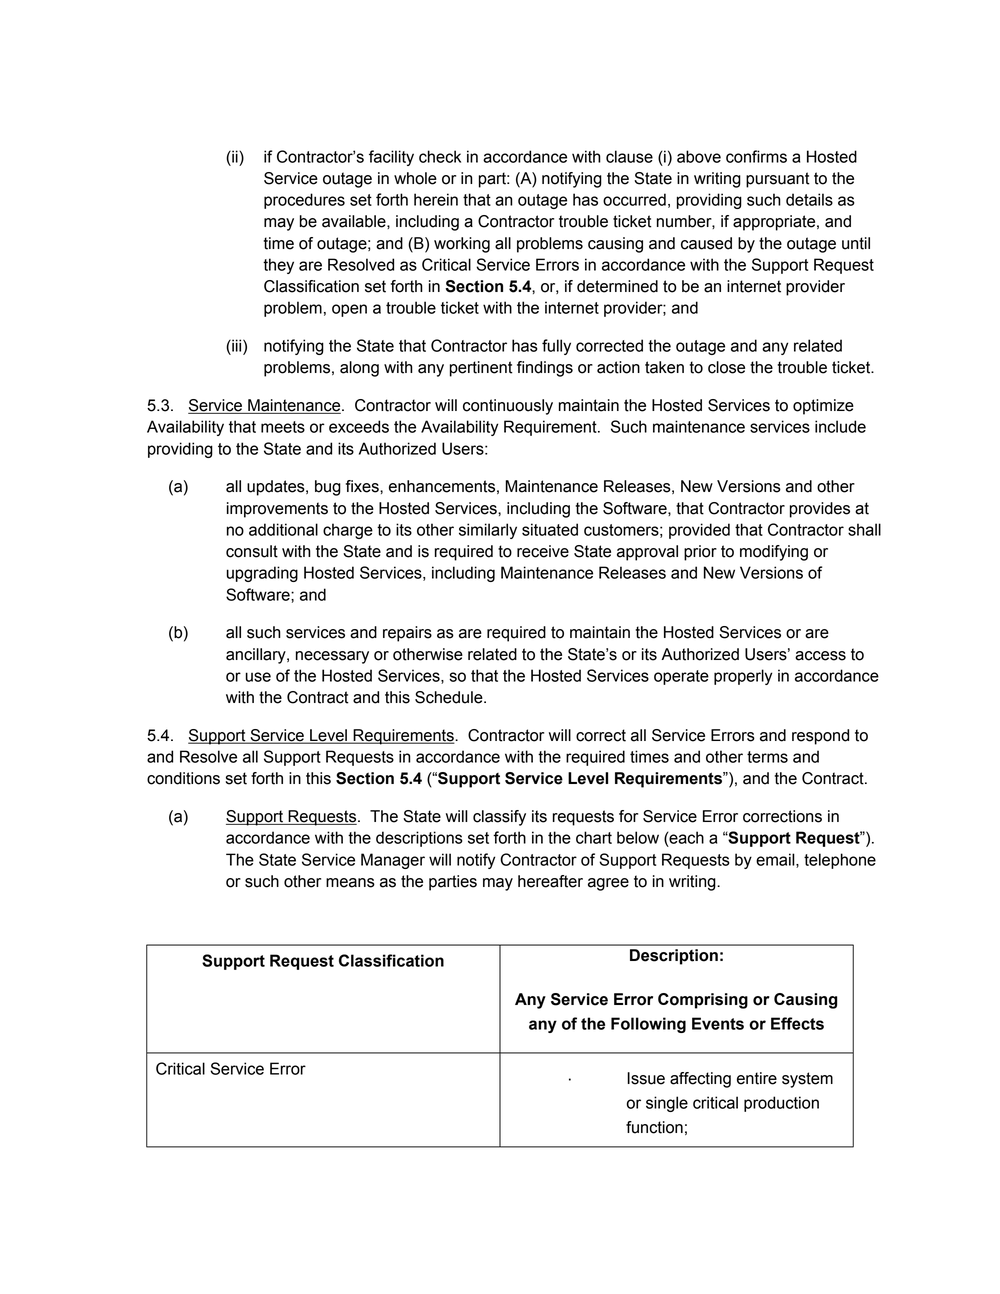 Page 64 from State of Michigan 2020 Kaseware contract